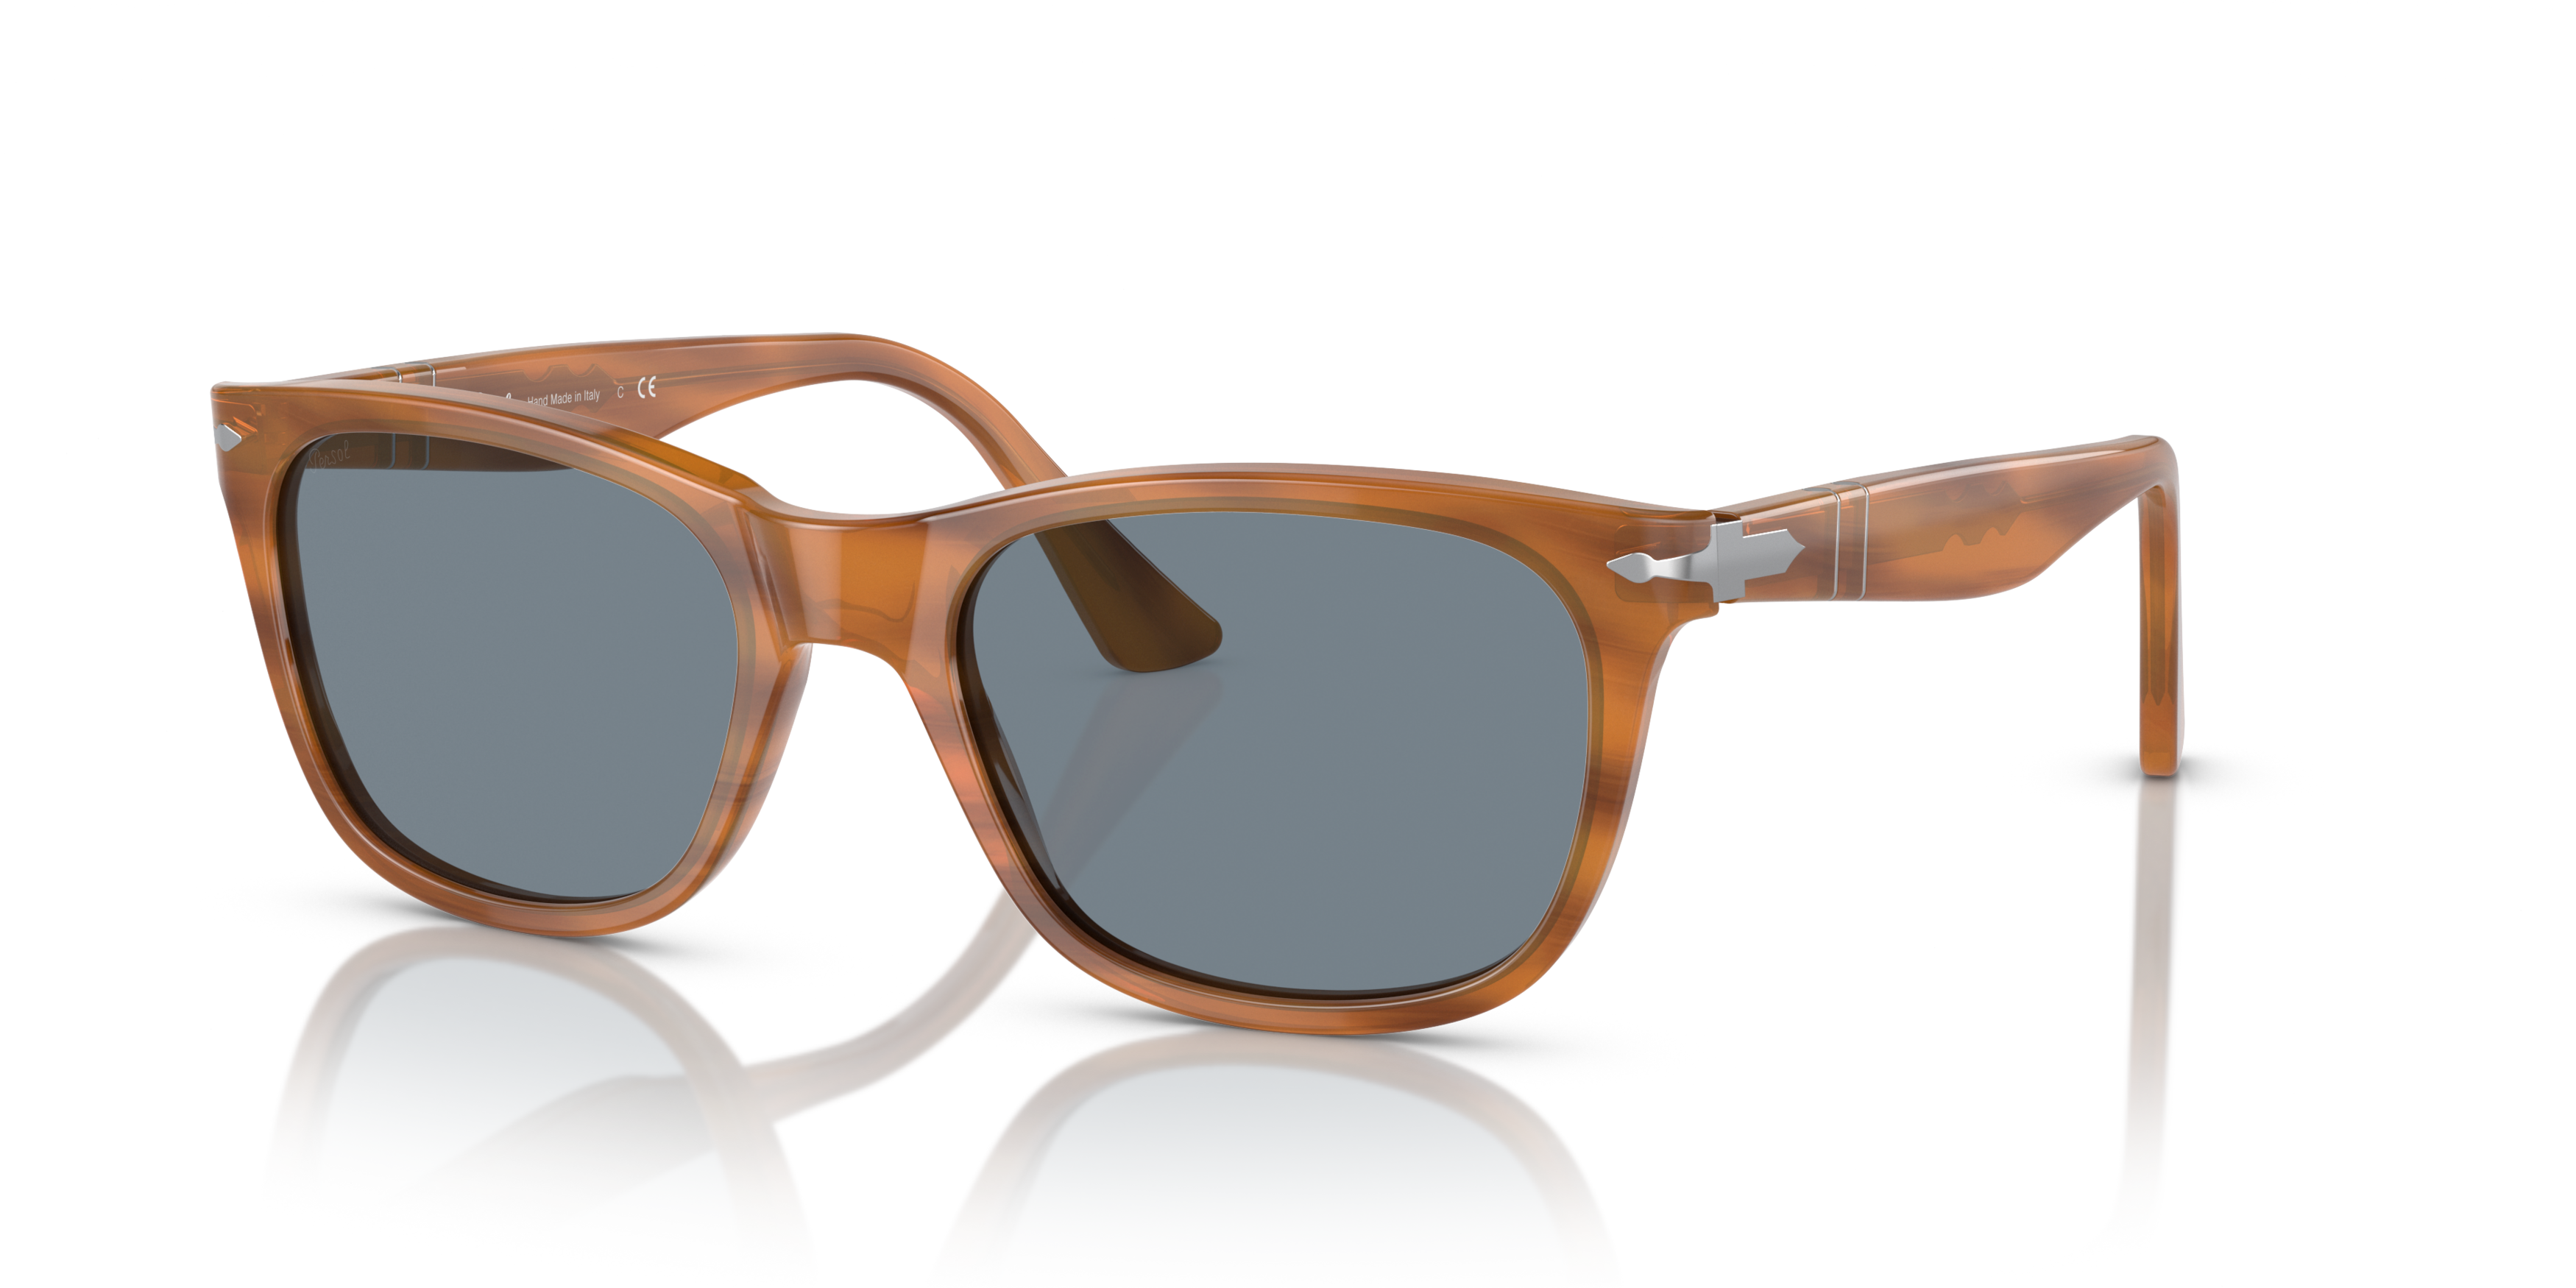 [products.image.angle_left01] Persol 0PO3291S 960/56 Solbriller